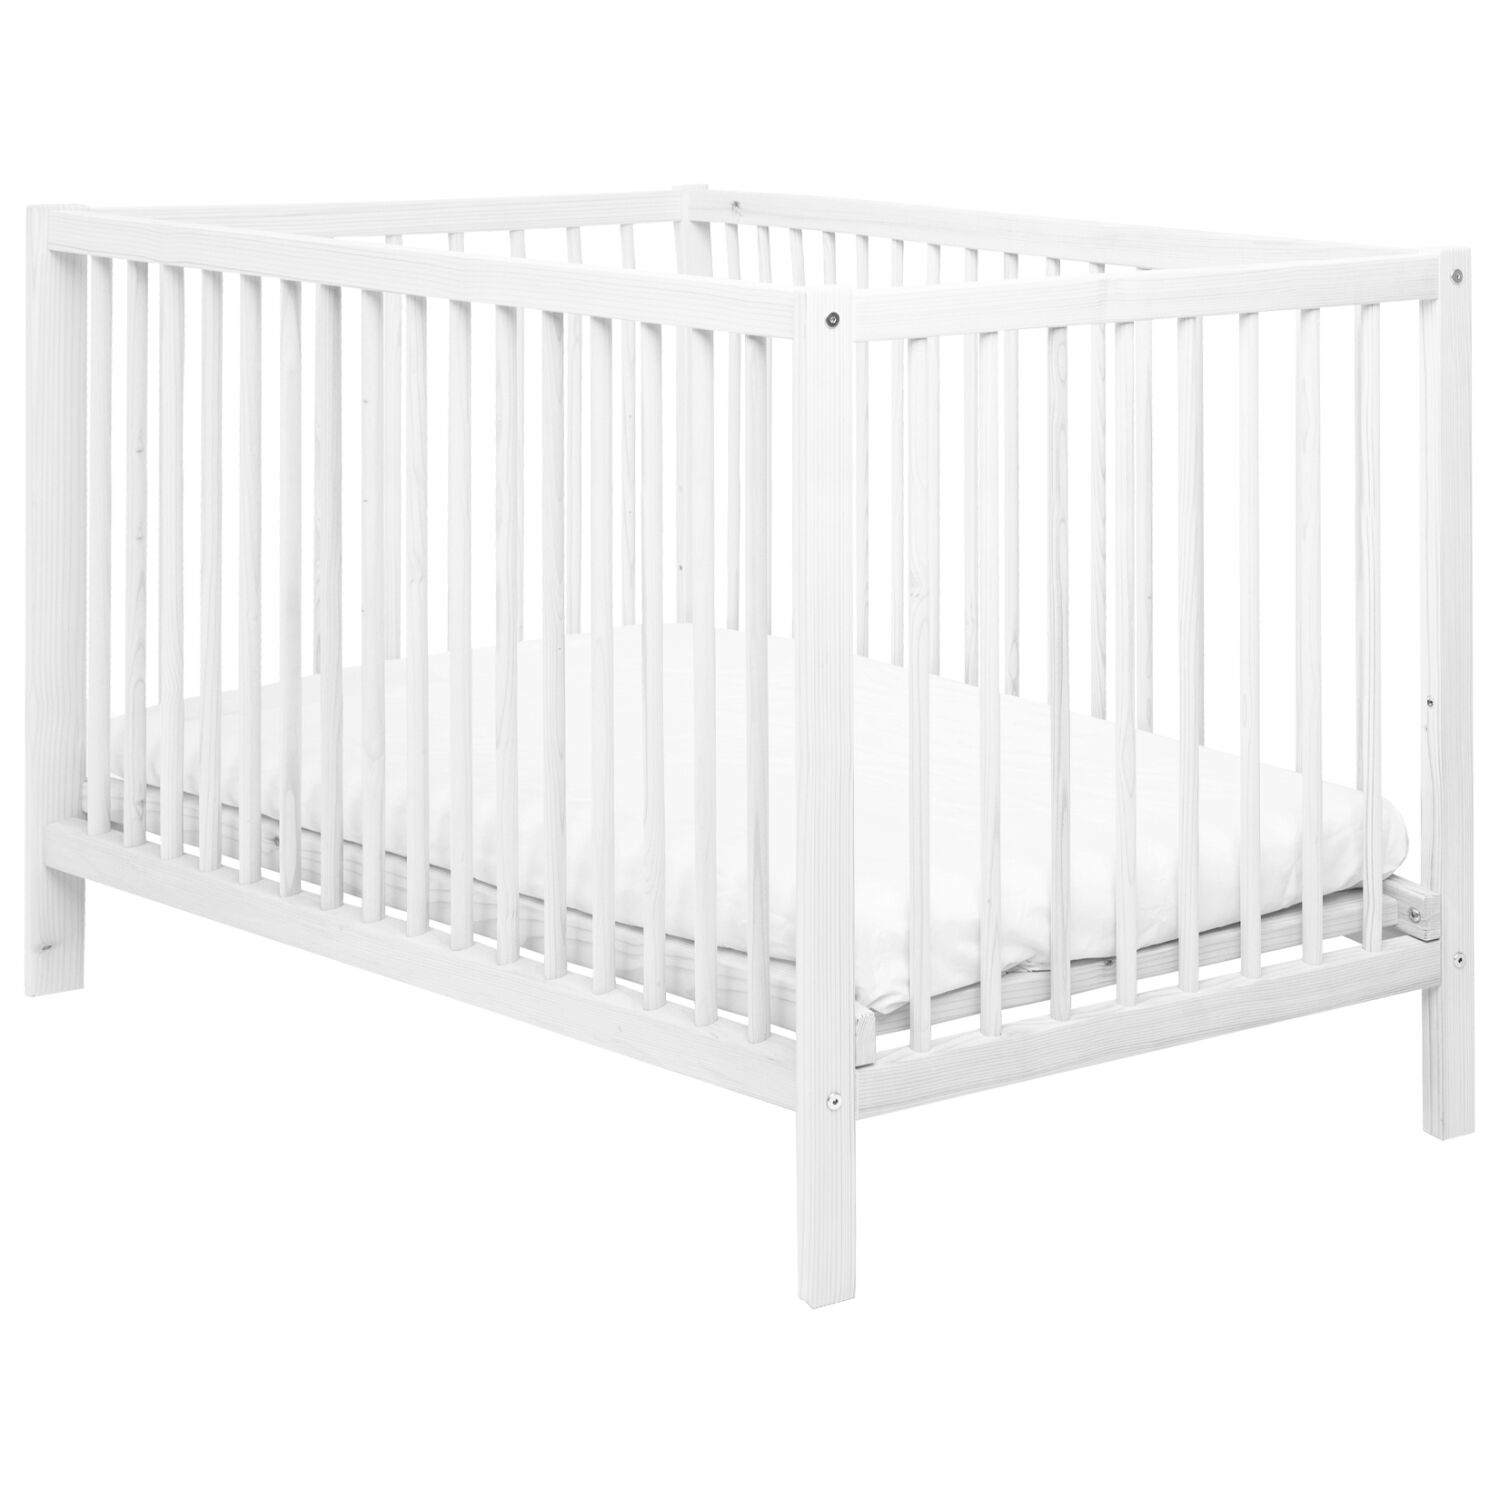 HM9296.02- Baby cradle-bed MIKO, wooden, white, for mattress 120x60cm